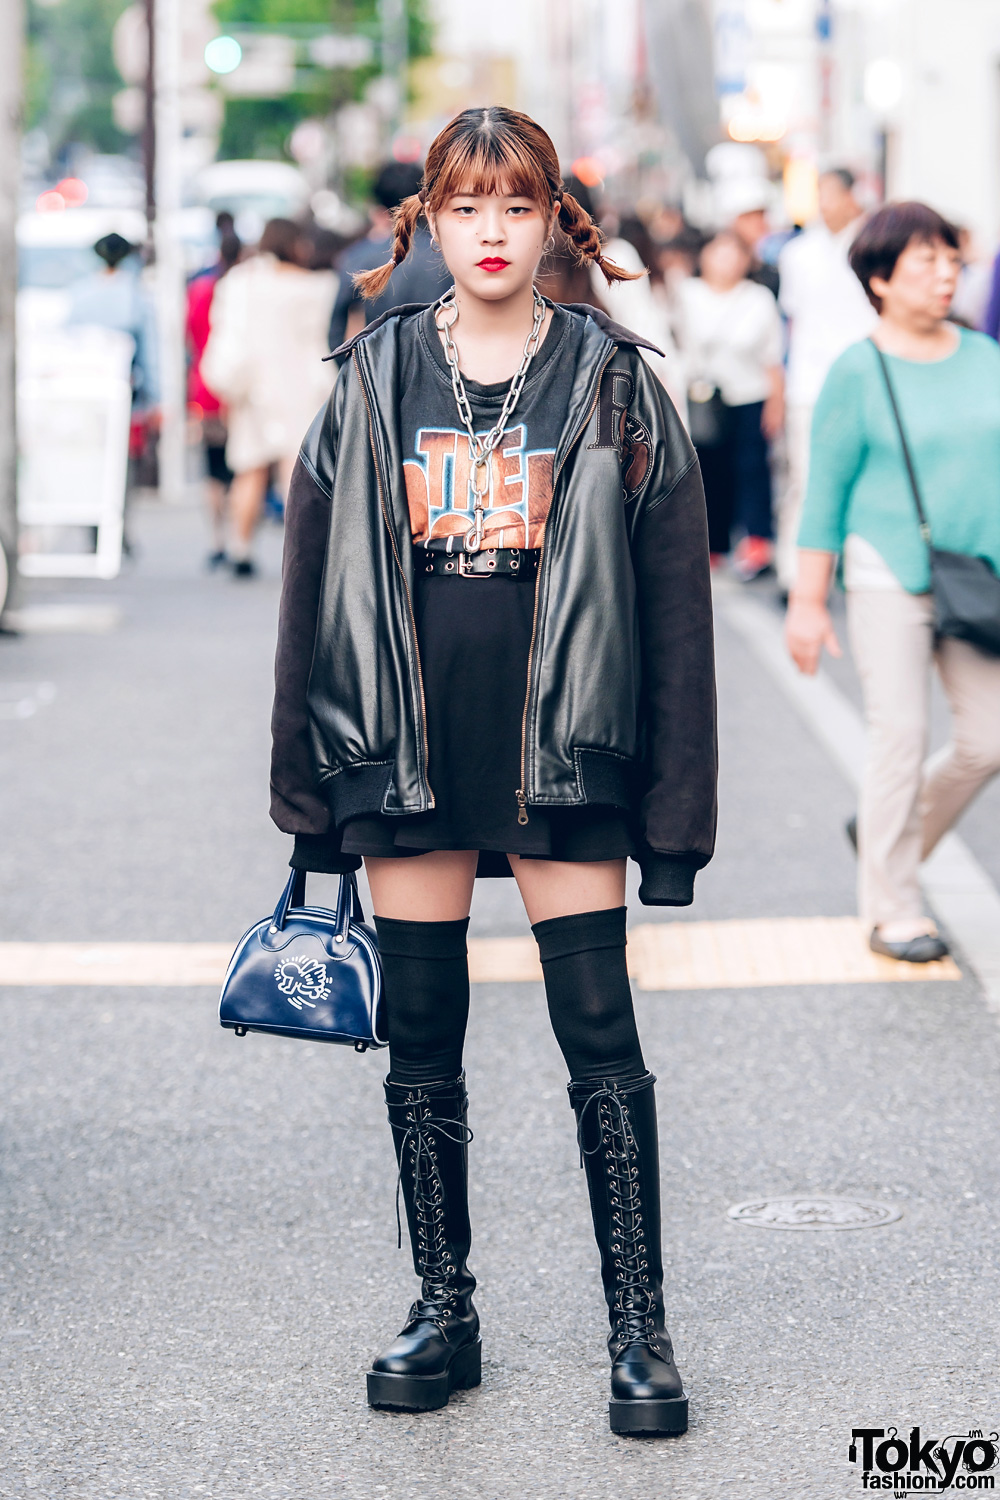 knee-high lace-up boots | Tokyo Fashion News